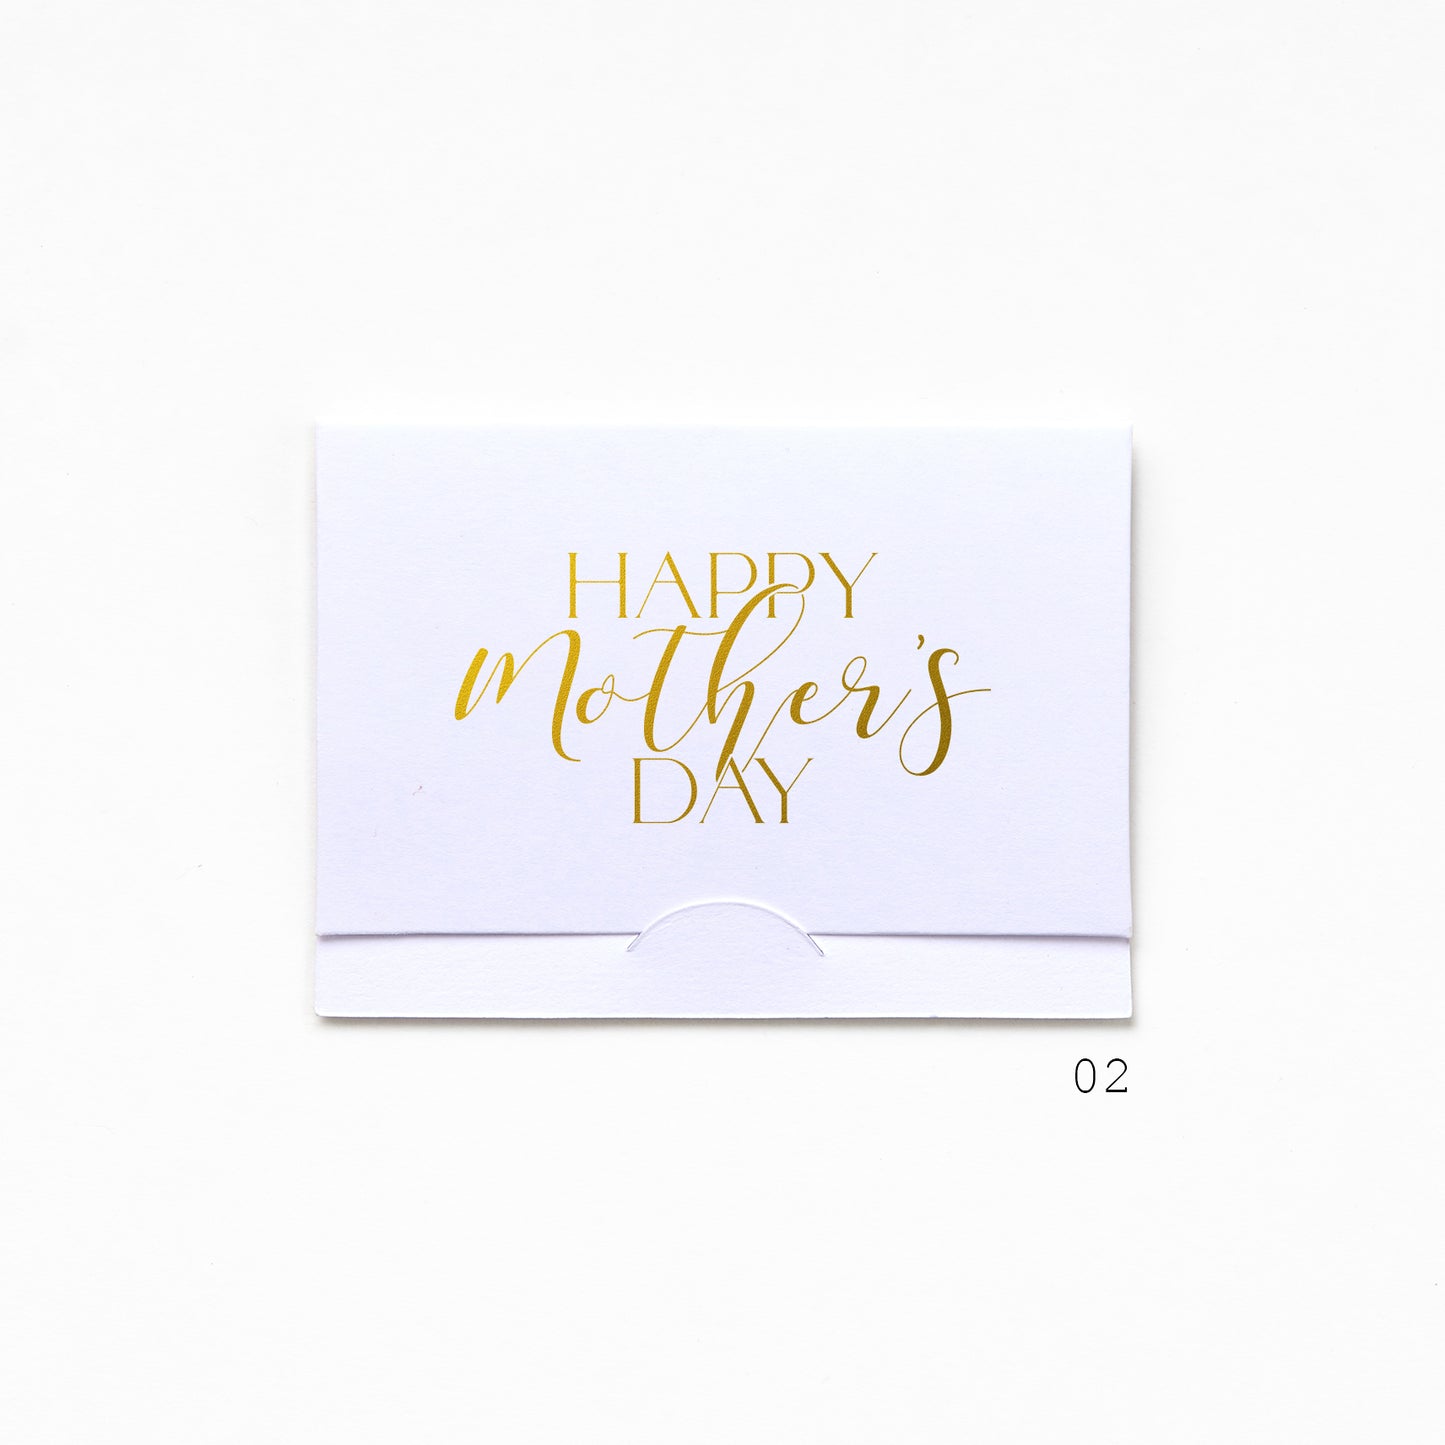 Pocket Greeting Card - Happy Mother's Day 02